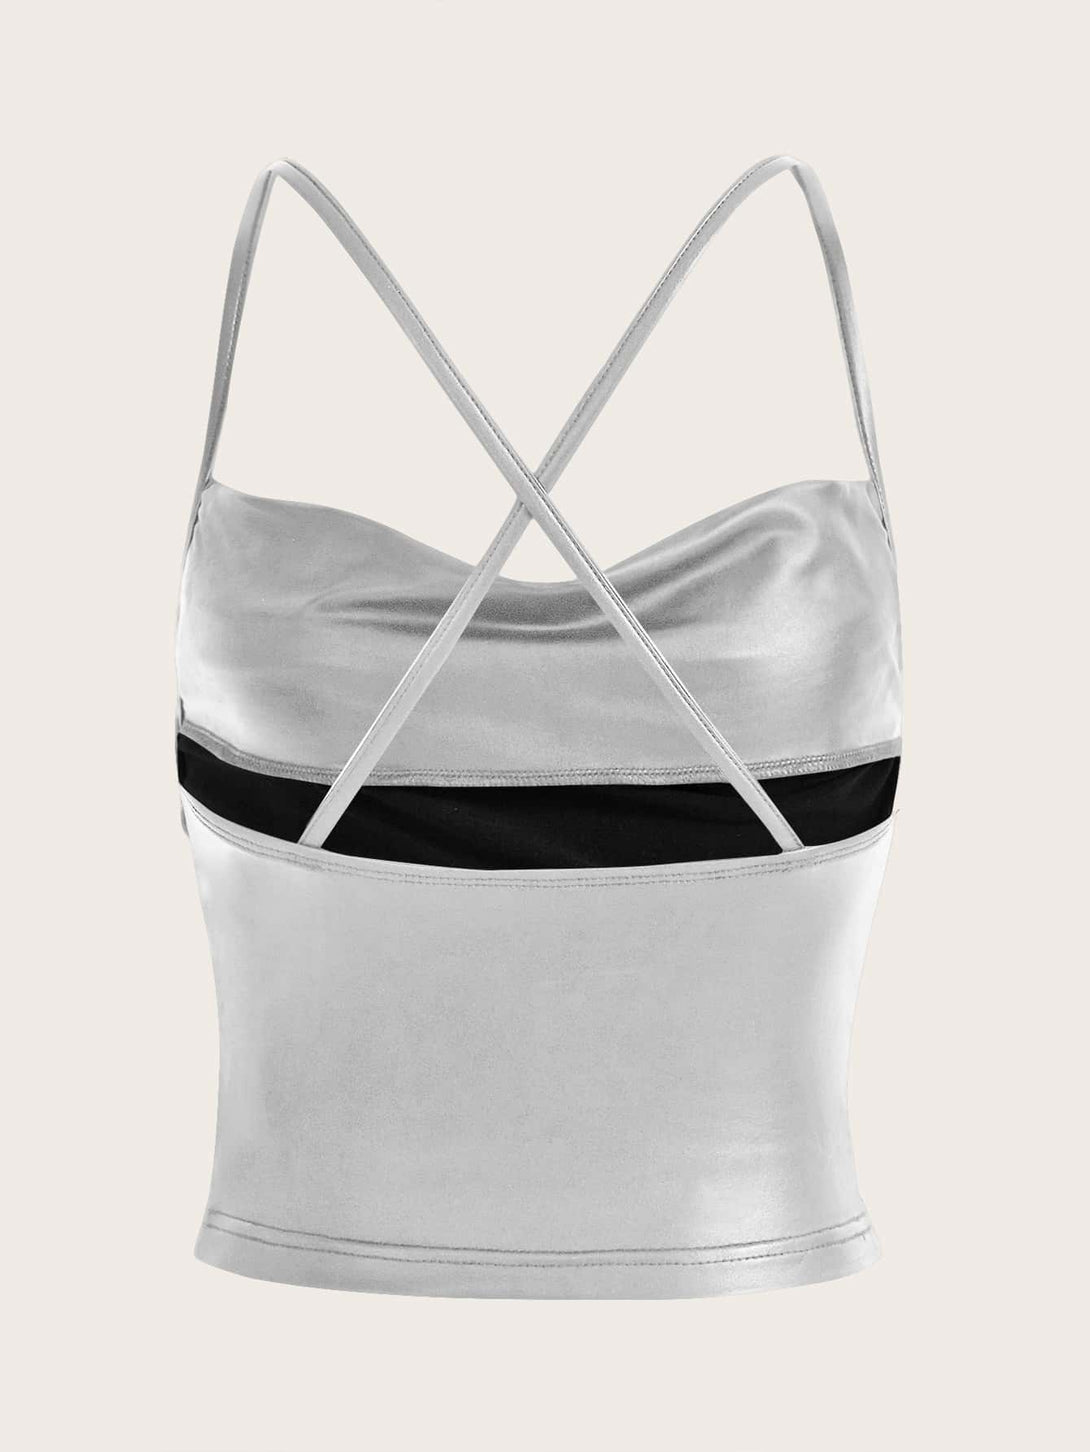 SHEIN ICON Metallic Draped Collar Crisscross Backless Ruched PU Leather Cami Top - Negative Apparel